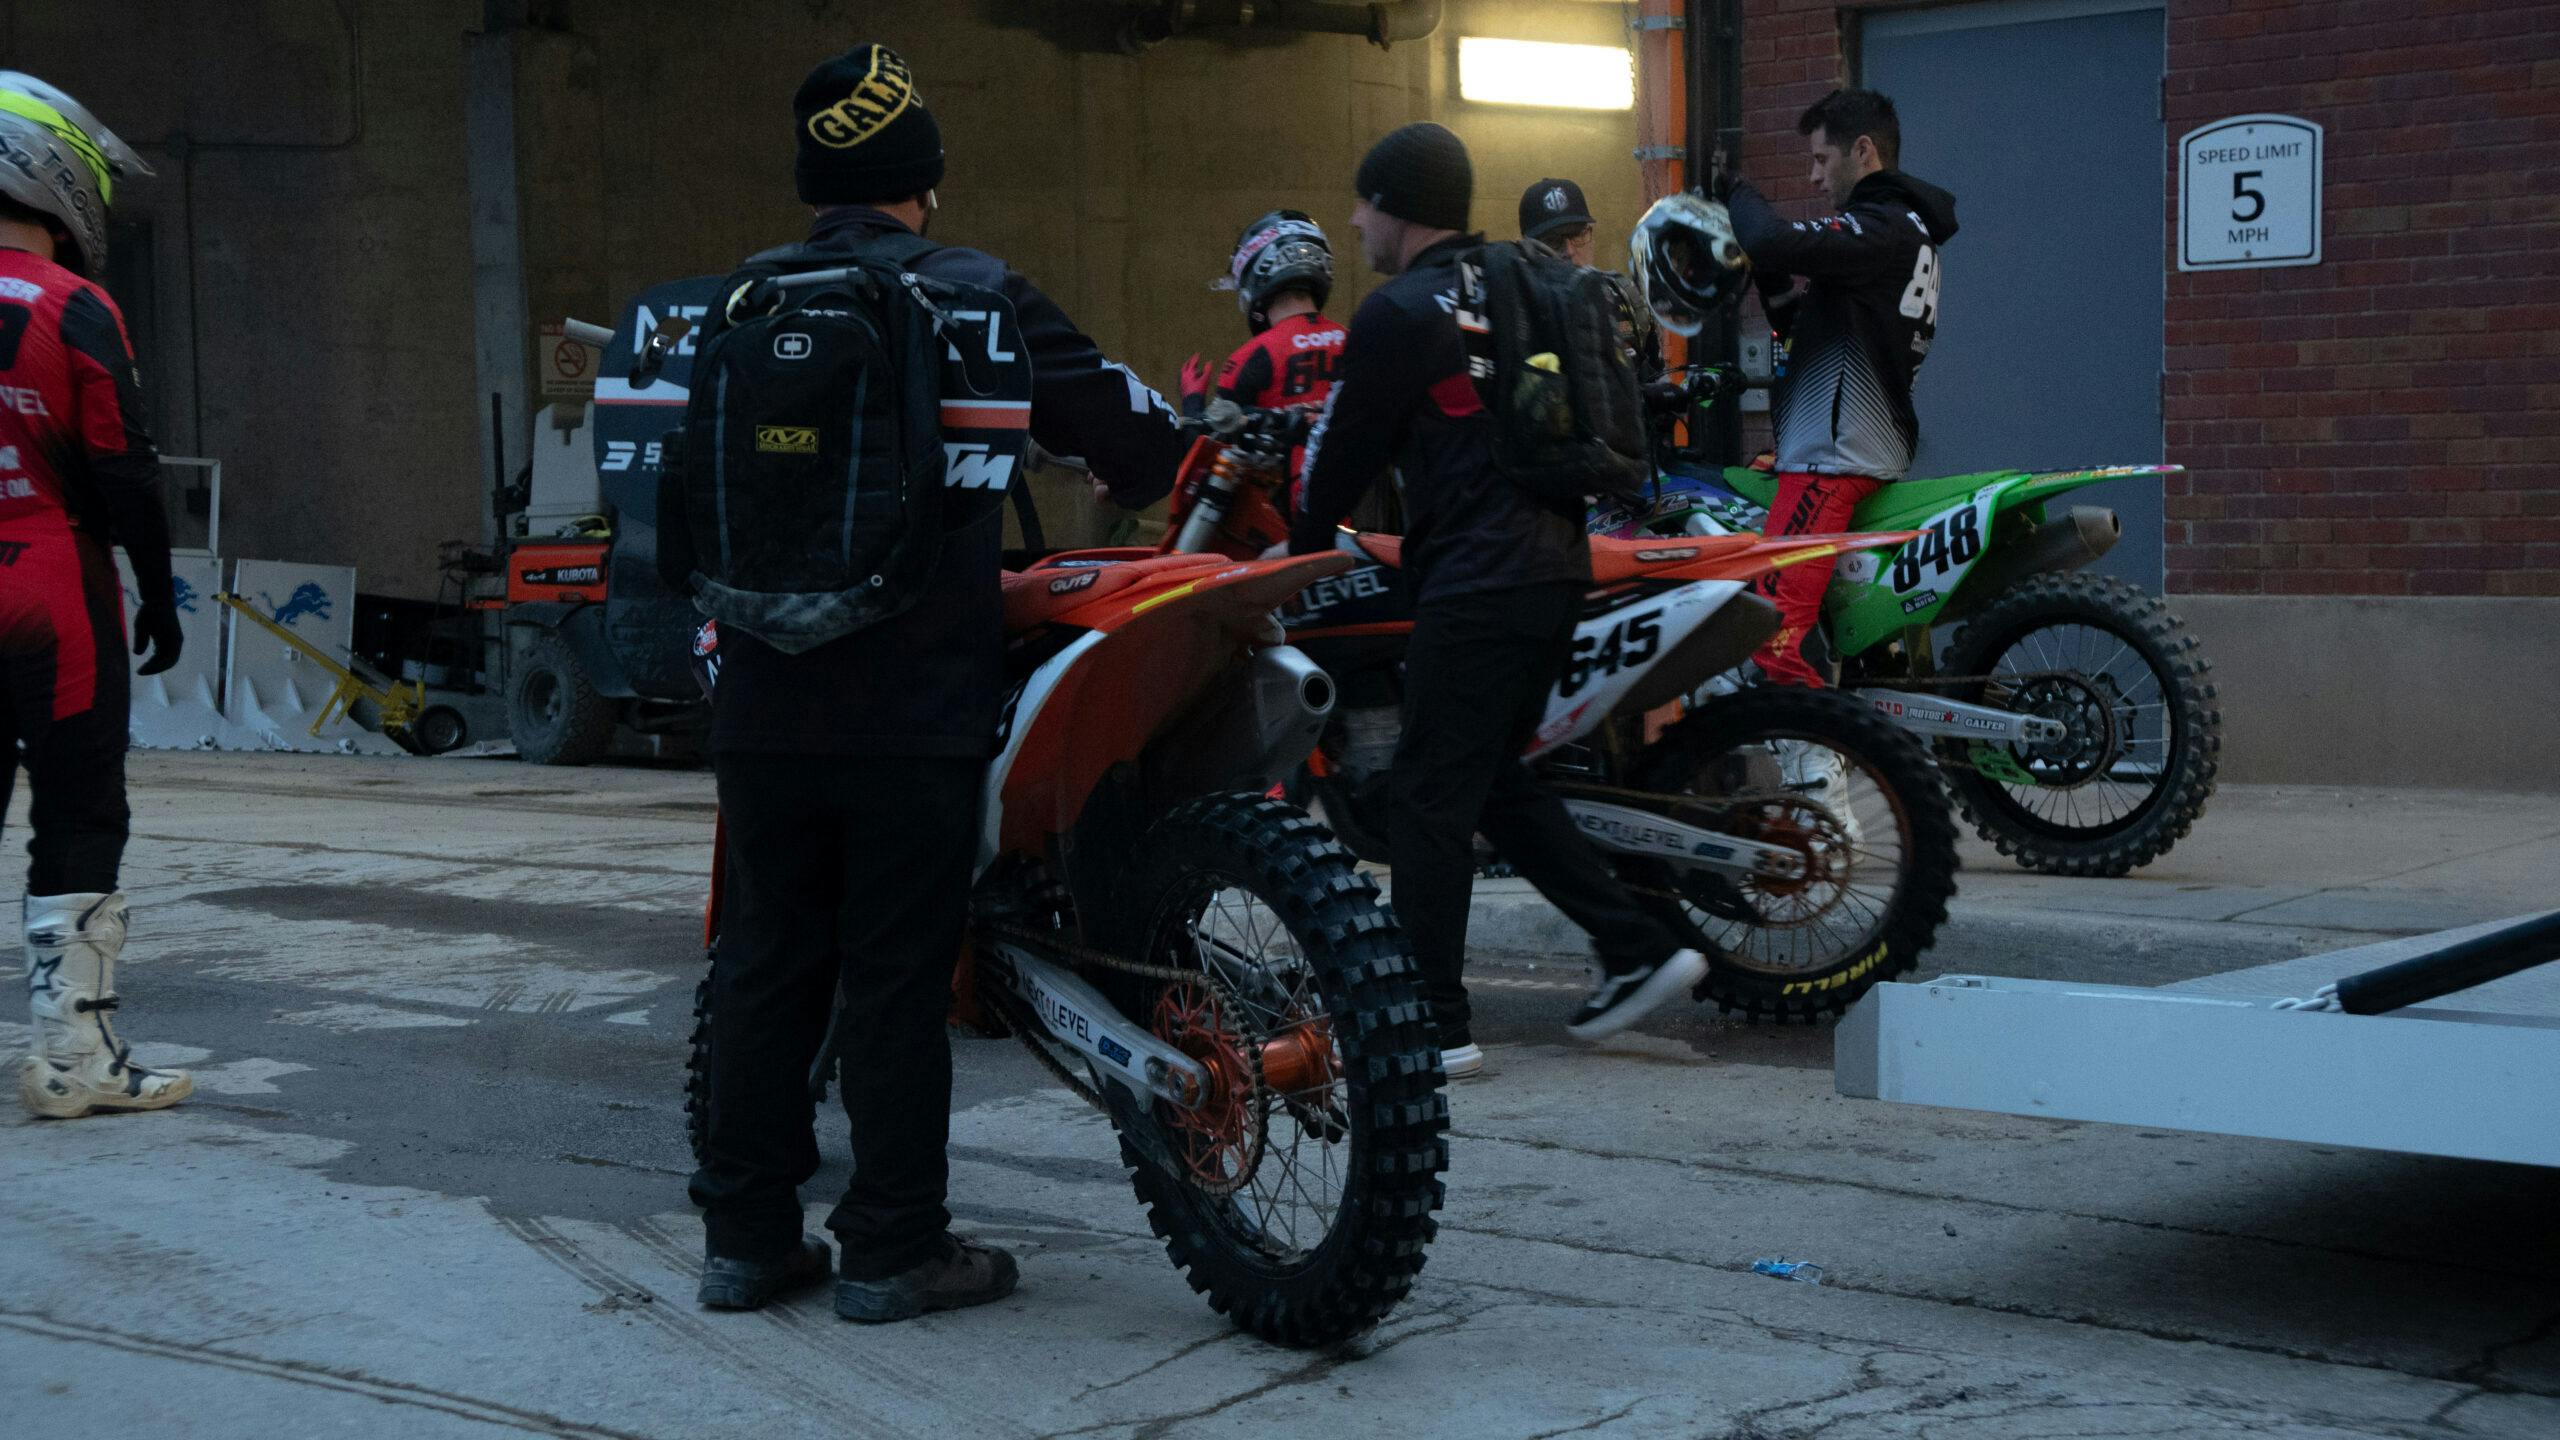 Supercross bikes waiting to enter Ford field